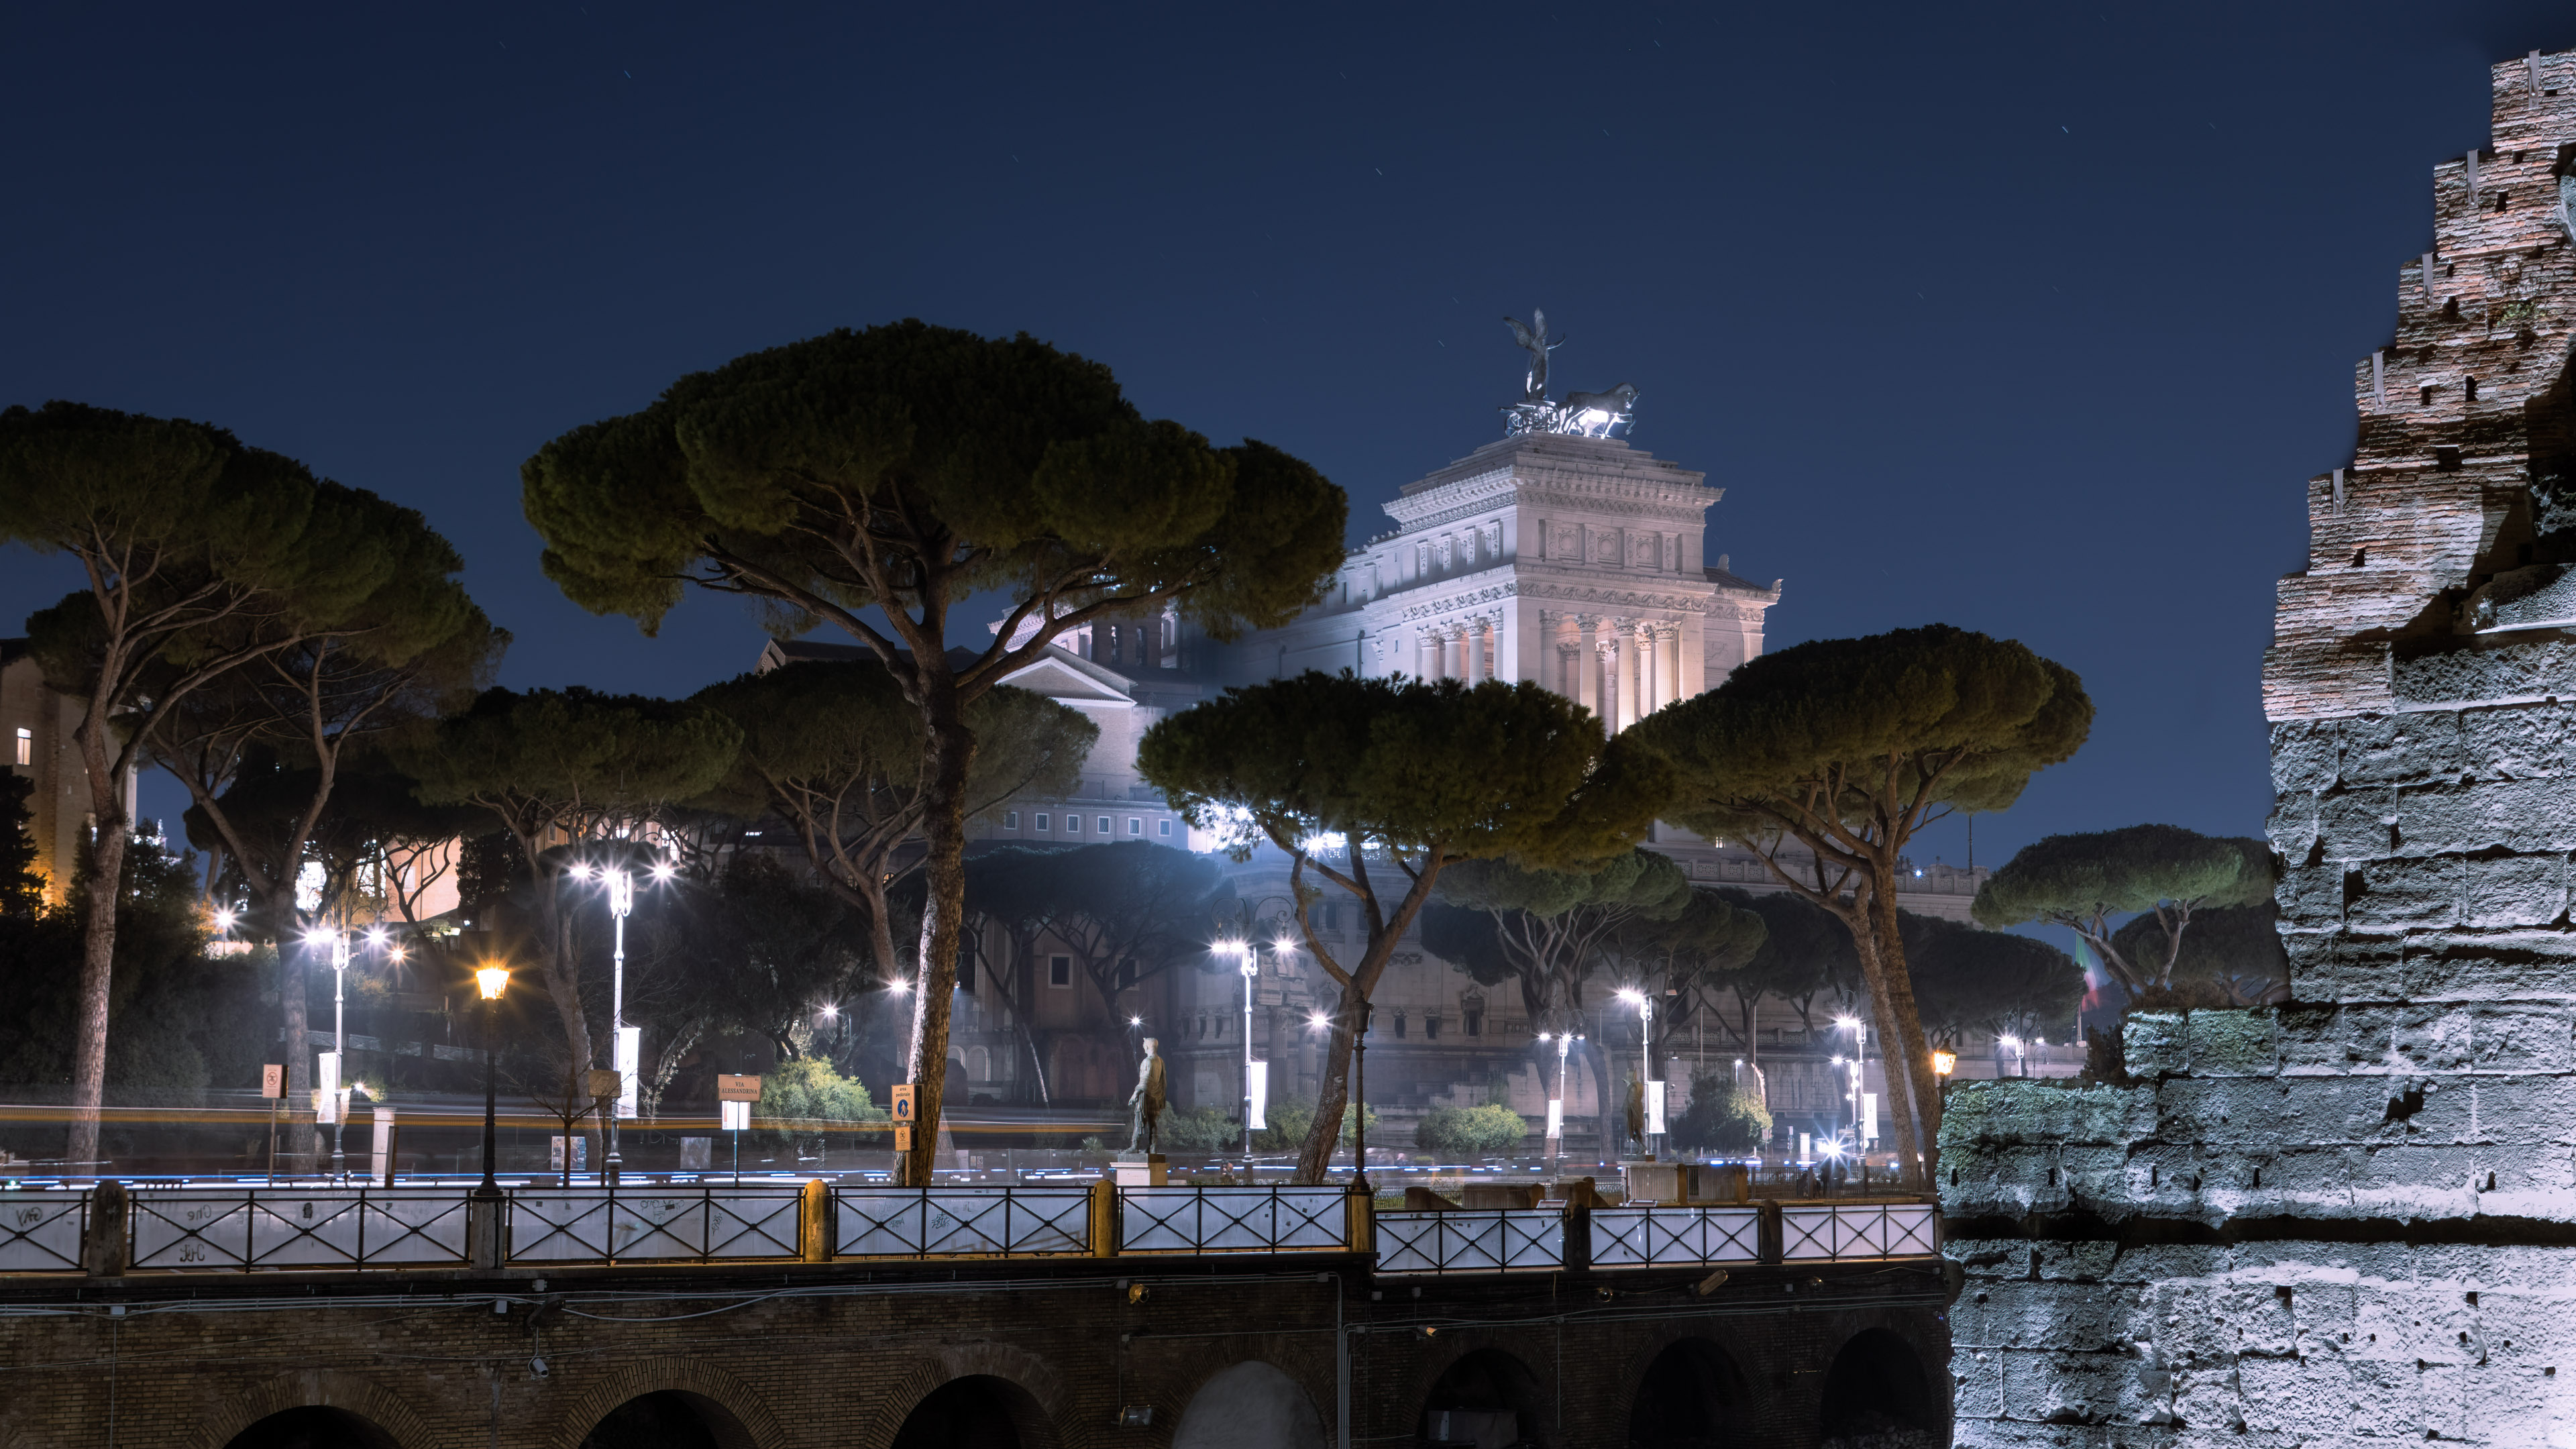 Get the best night scenery wallpaper with stunning view of Rome city at night with streetlights for your desktop.